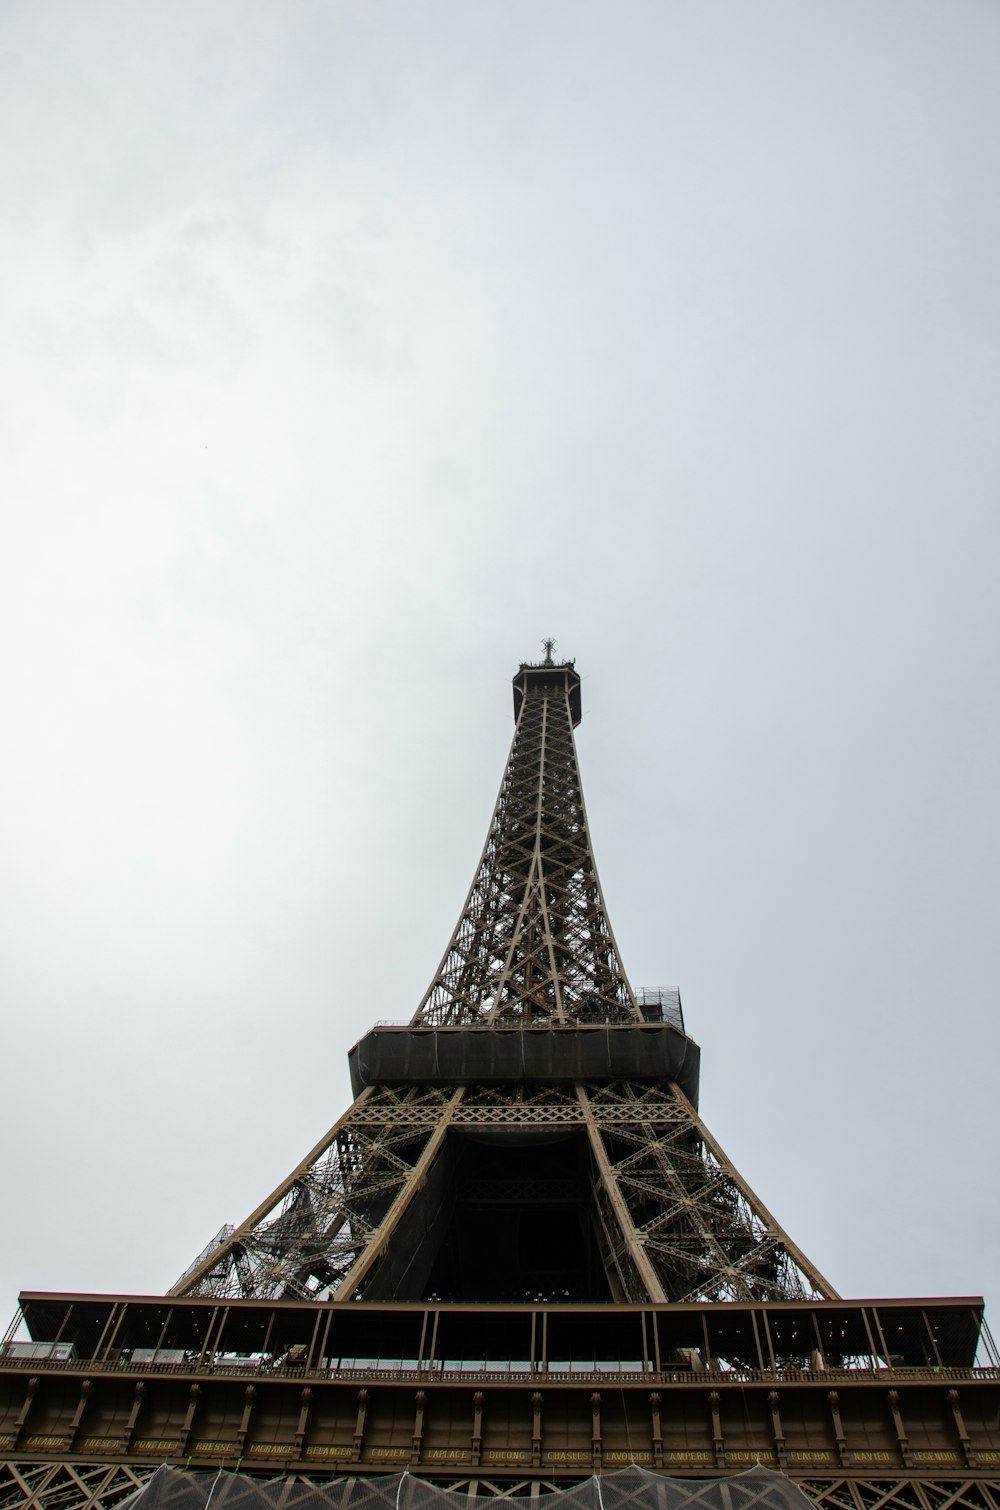 the top of the eiffel tower against a cloudy sky